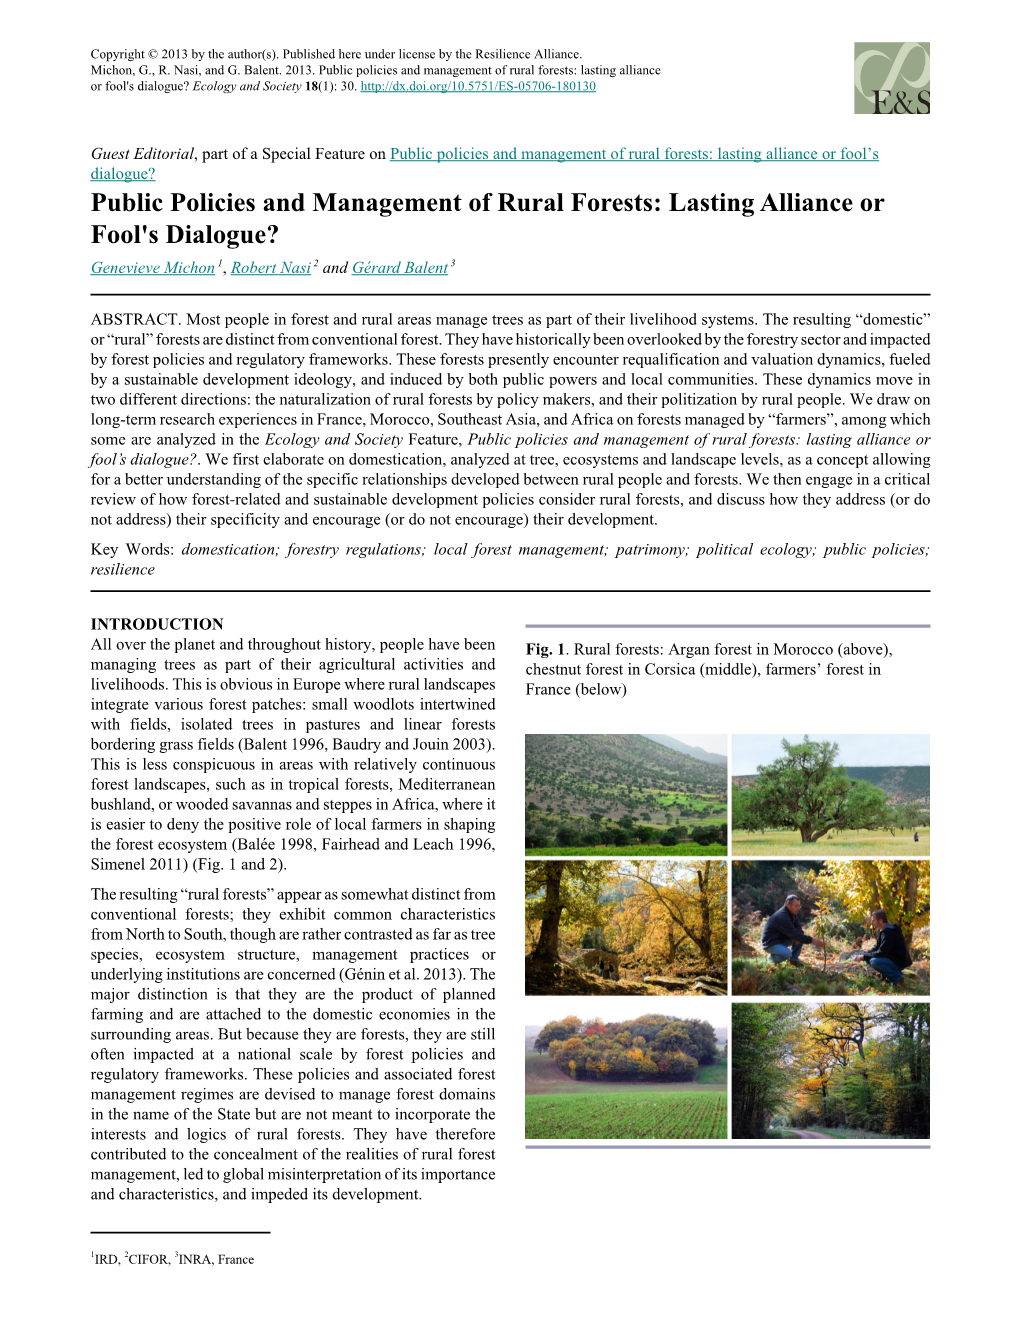 Public Policies and Management of Rural Forests : Lasting